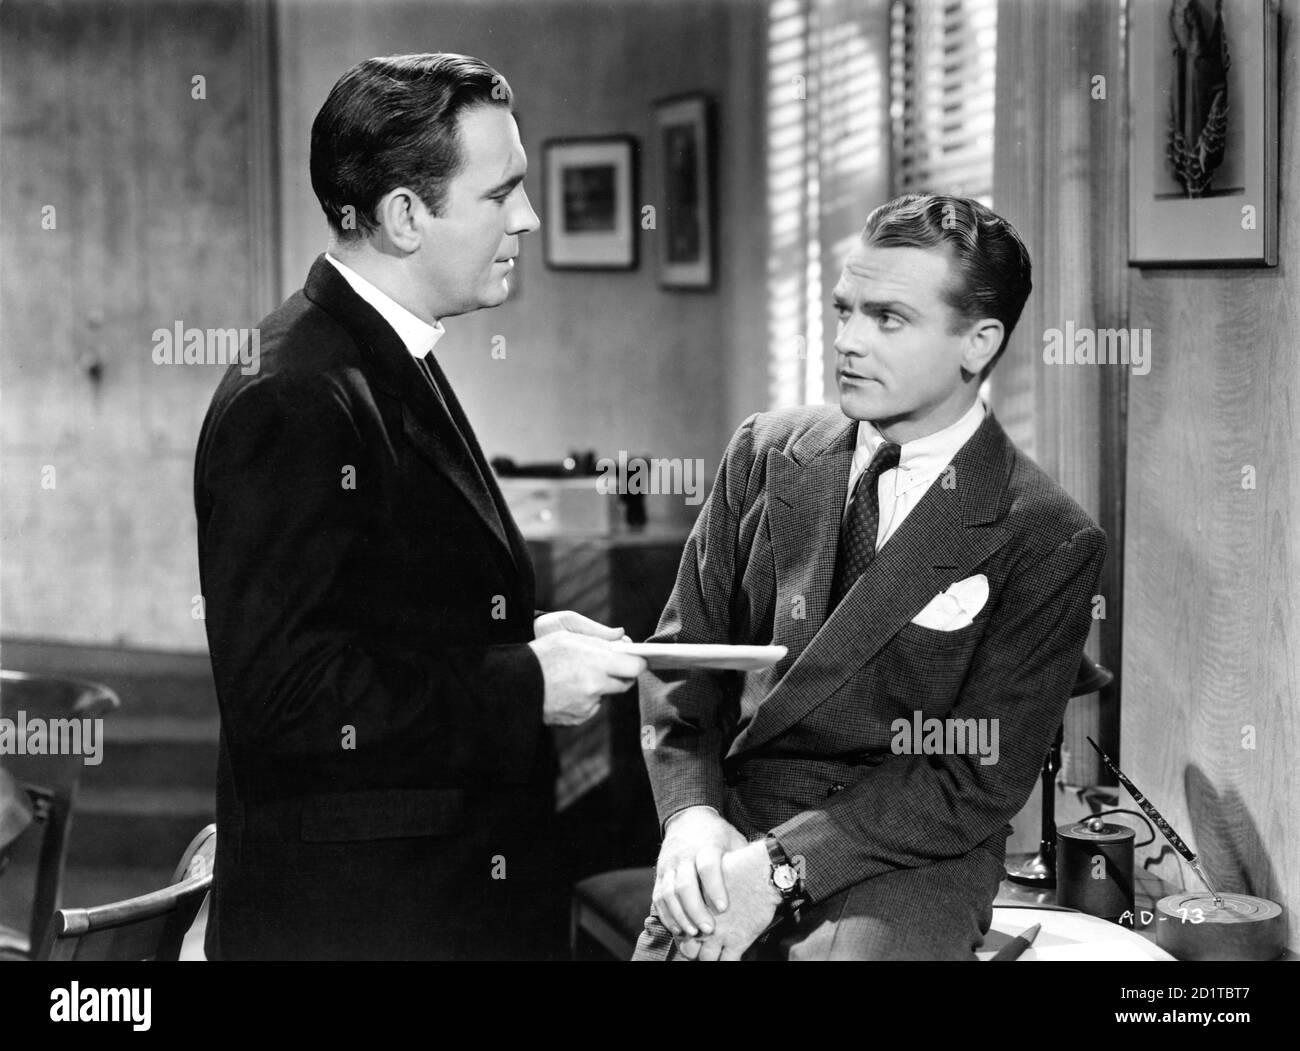 PAT O'BRIEN und JAMES CAGNEY in ANGELS WITH DIRTY FACES 1938 Regisseur MICHAEL CURTIZ Warner Bros. Stockfoto